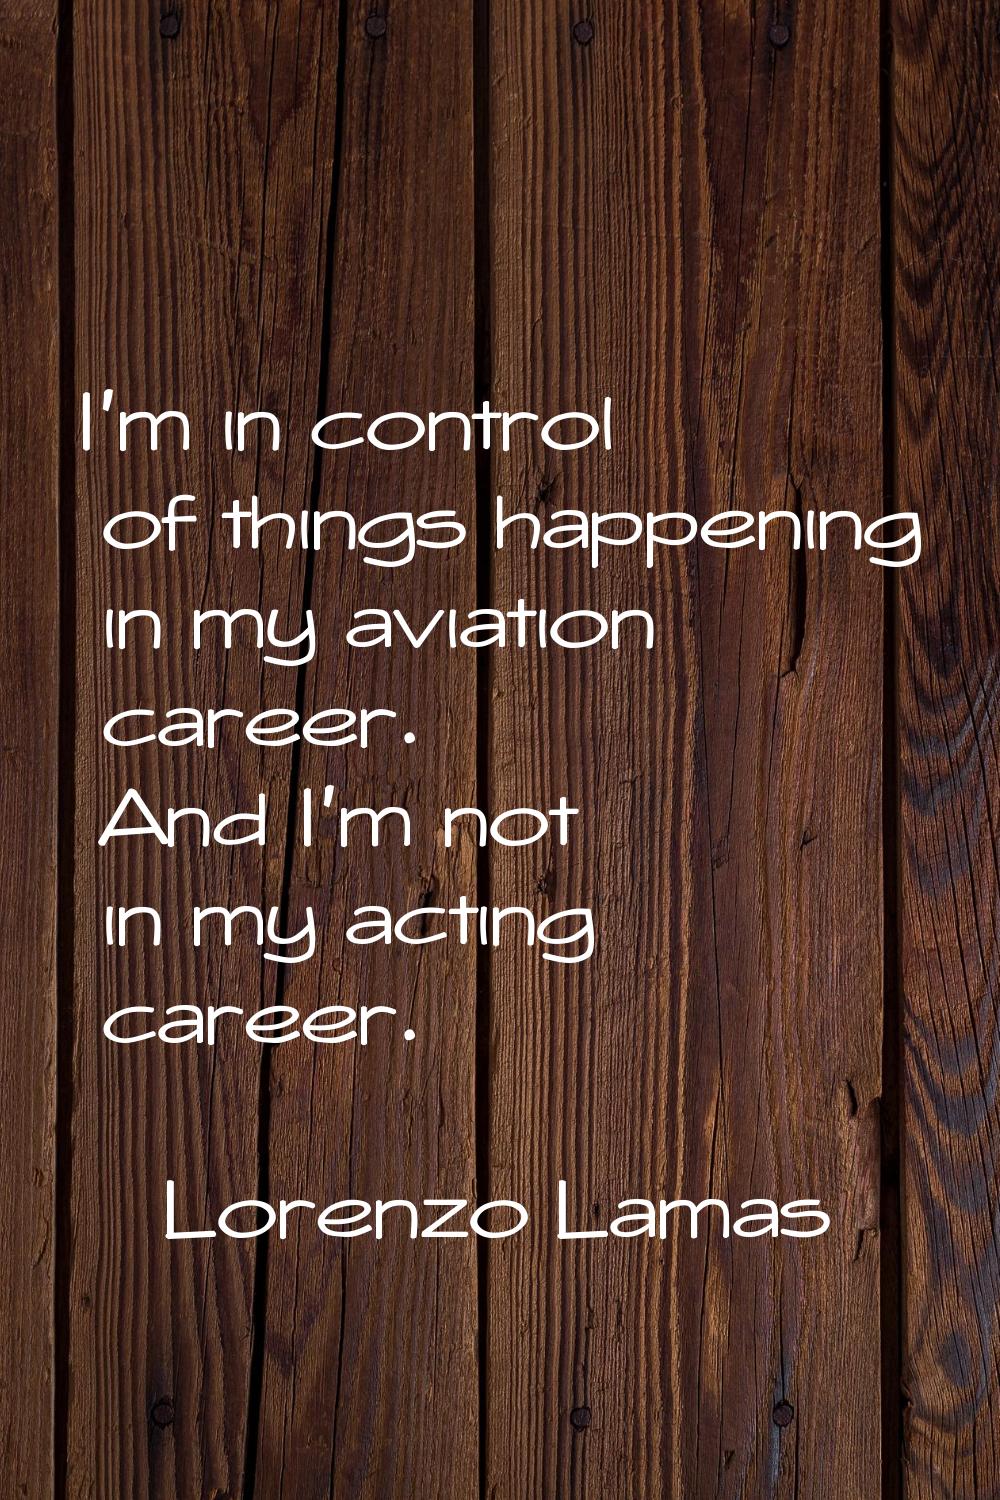 I'm in control of things happening in my aviation career. And I'm not in my acting career.